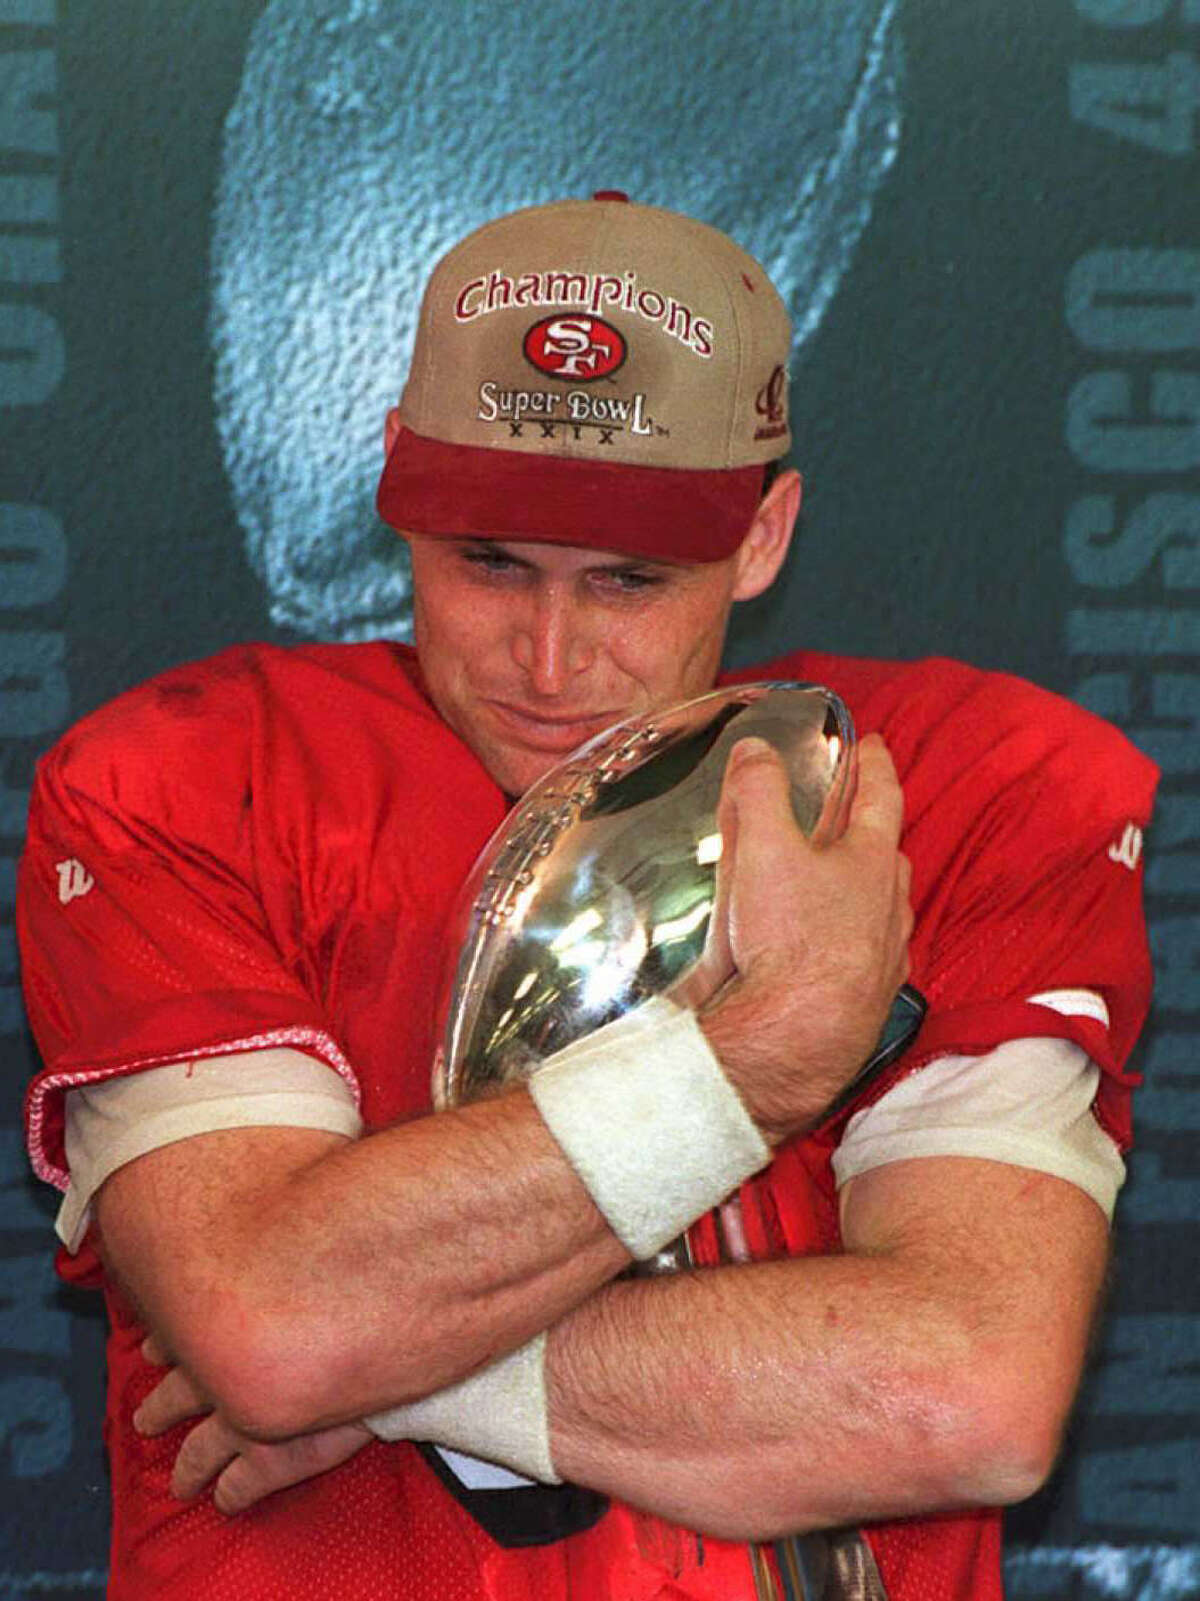 25 years ago today, Steve Young gets the Joe Montana monkey off